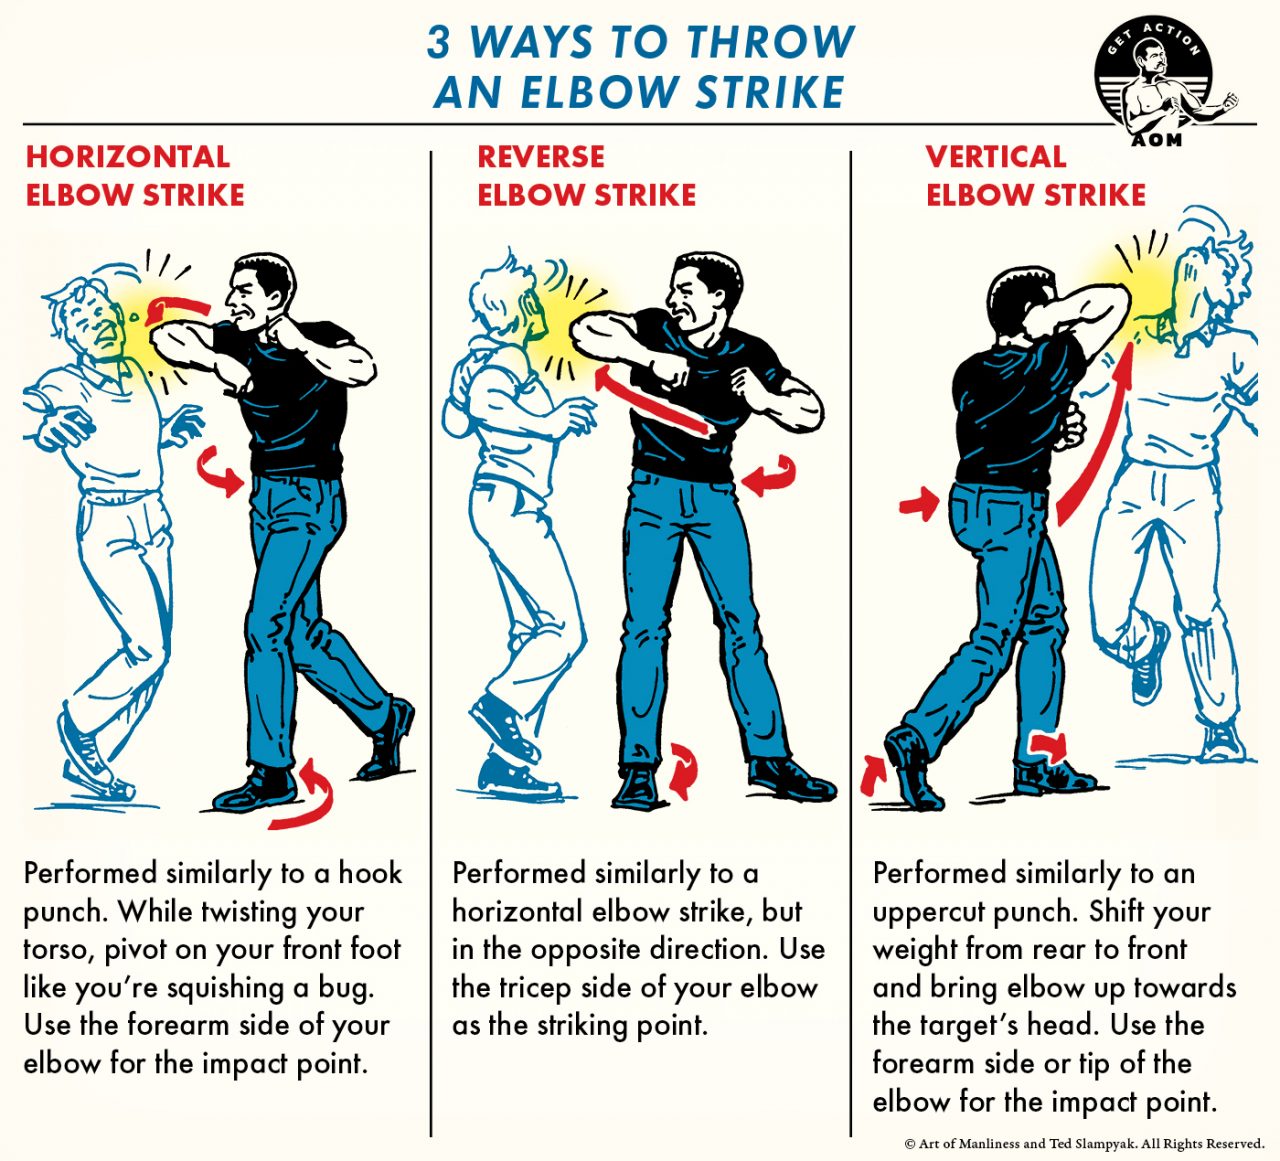 3 Ways To Throw An Elbow Strike The Art Of Manliness 